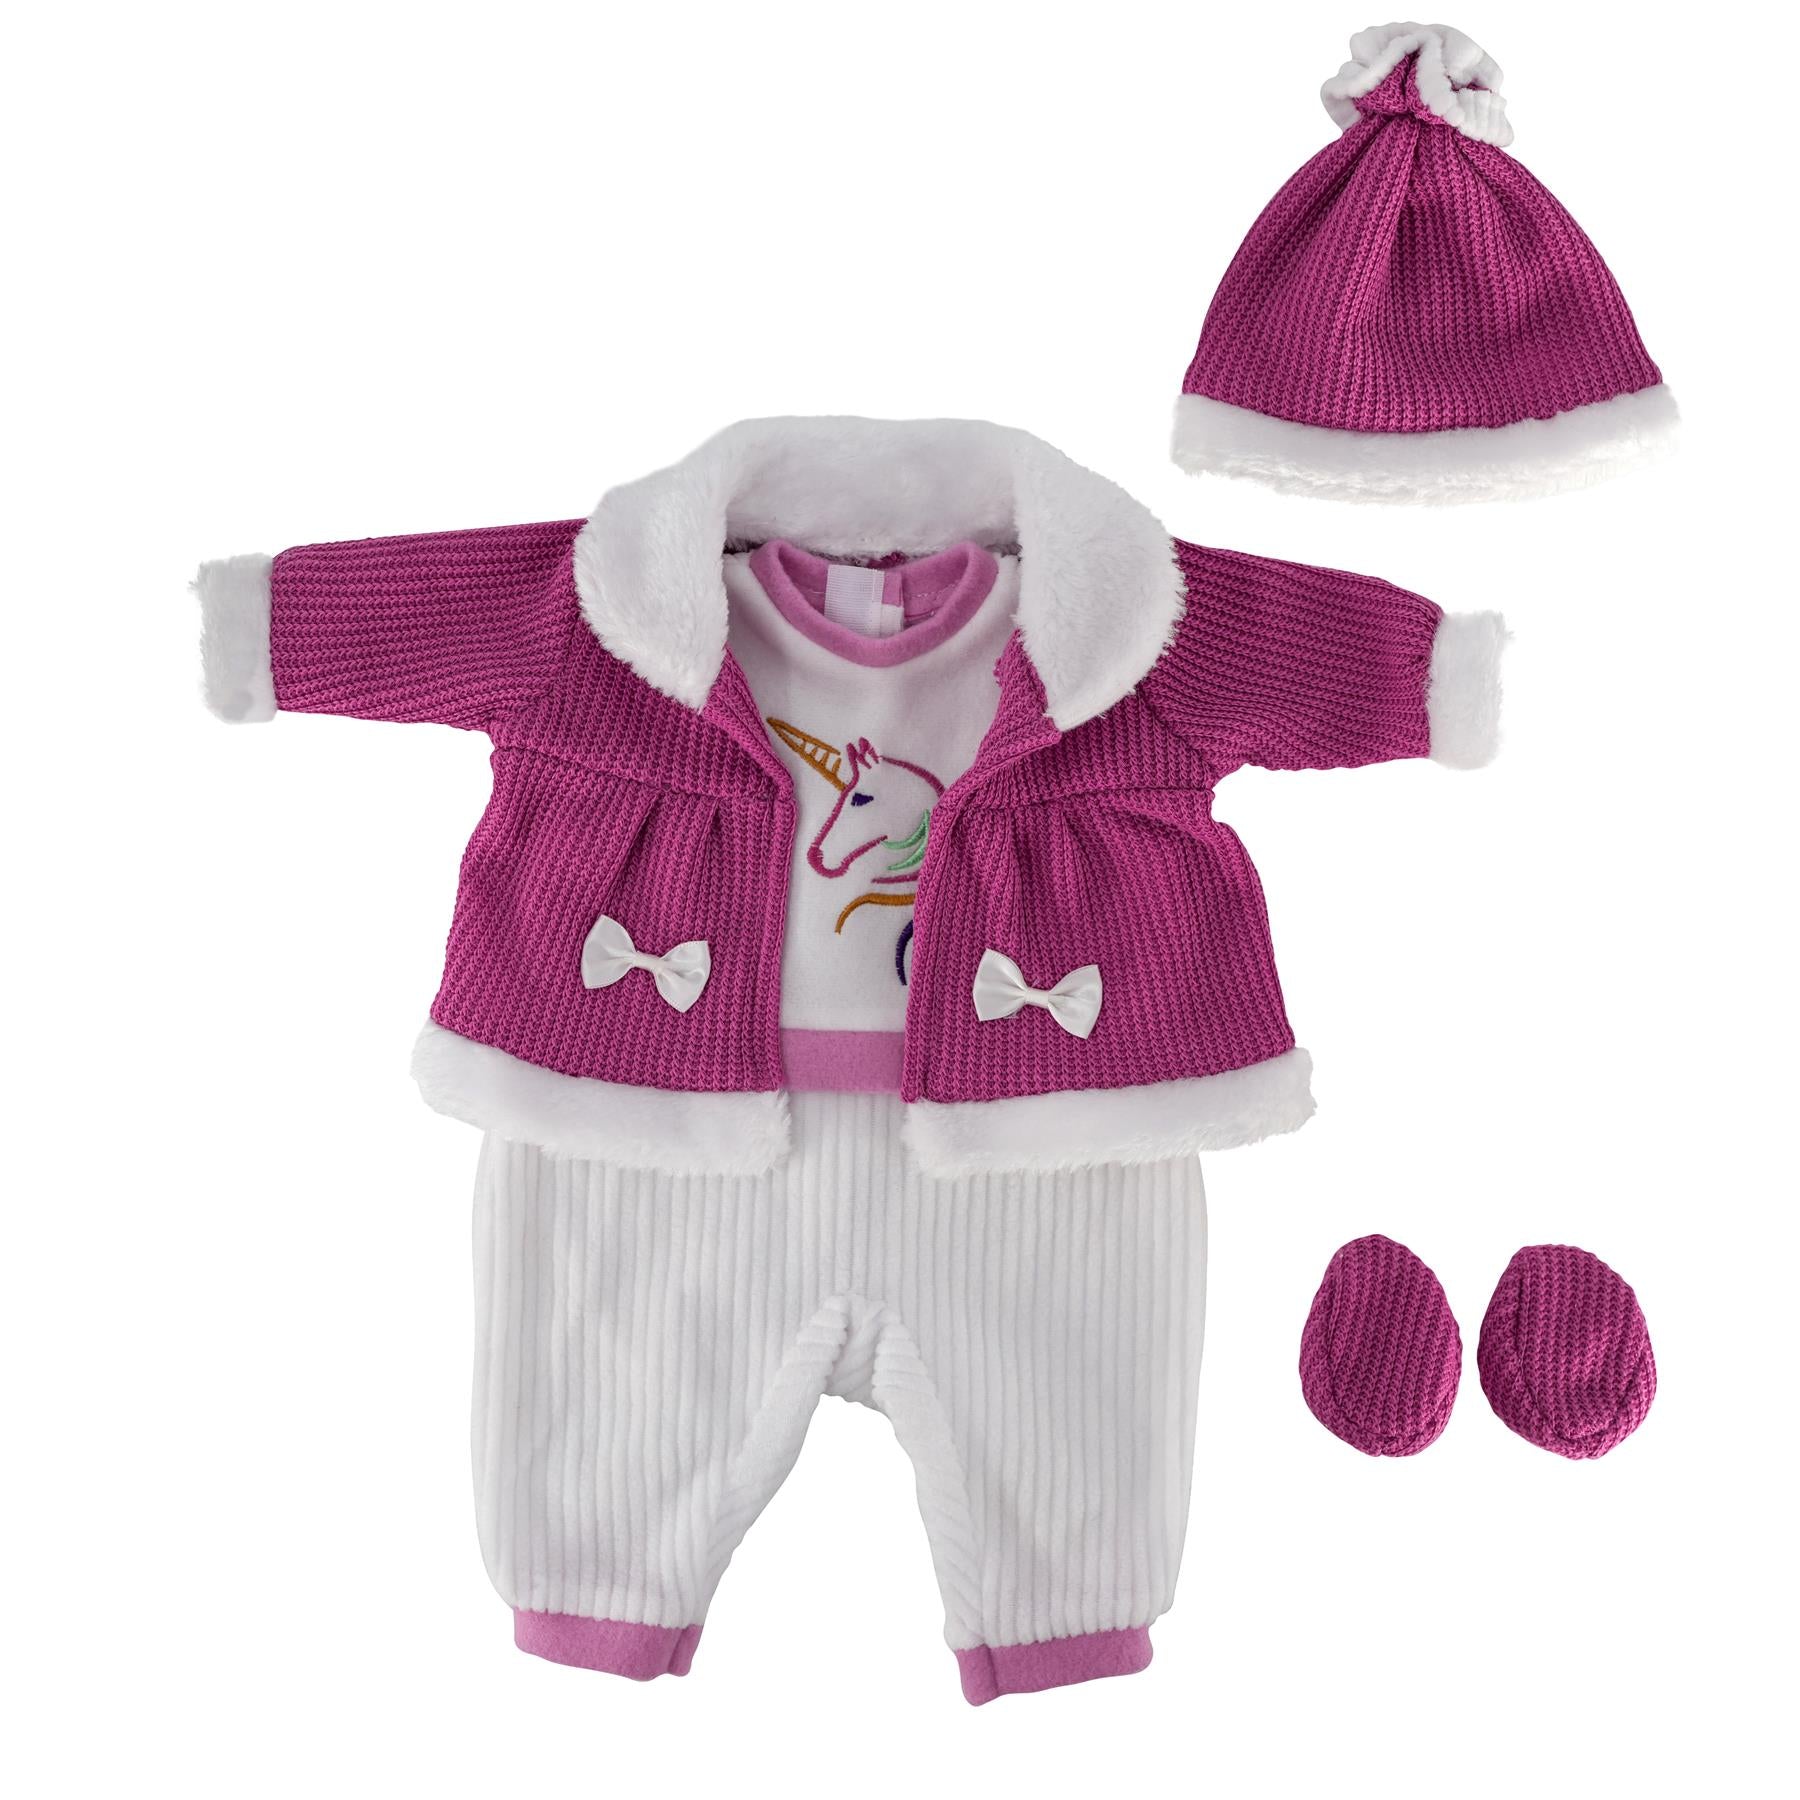 18" Baby Doll Hot Pink and Purple Clothes Set by BiBi Doll - The Magic Toy Shop